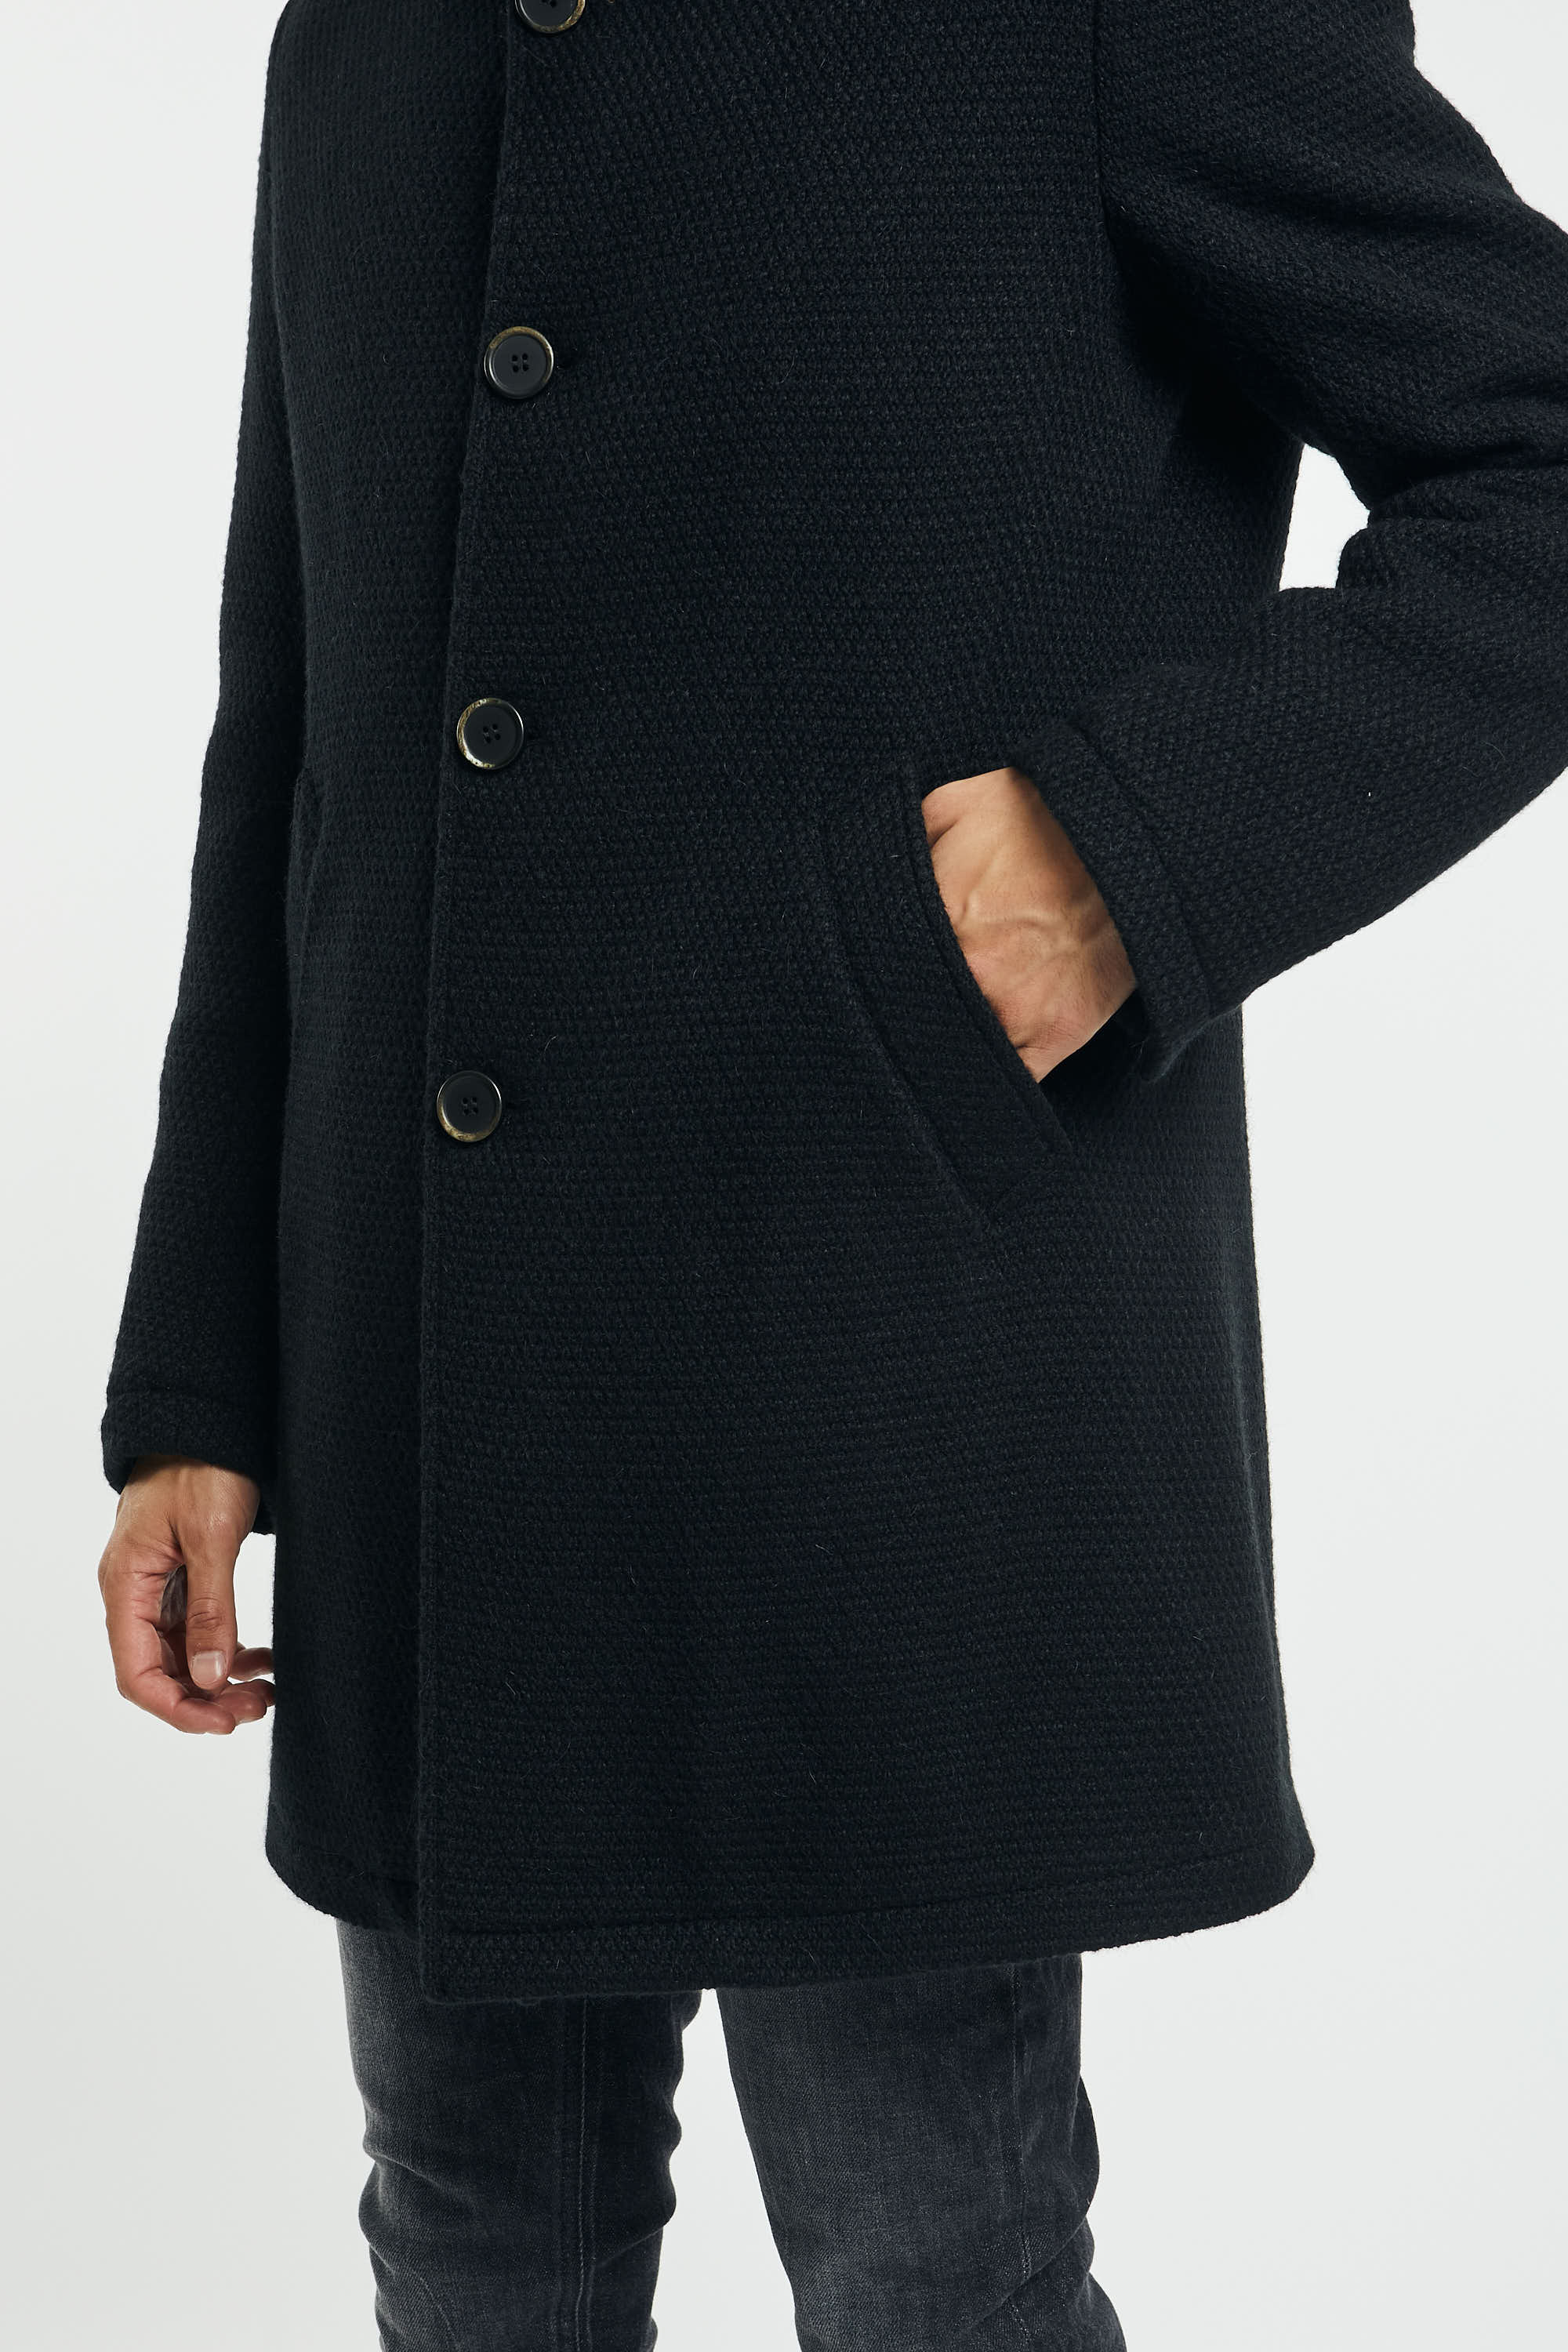 Gimos Black Coat Mixed Wool and Leather-6